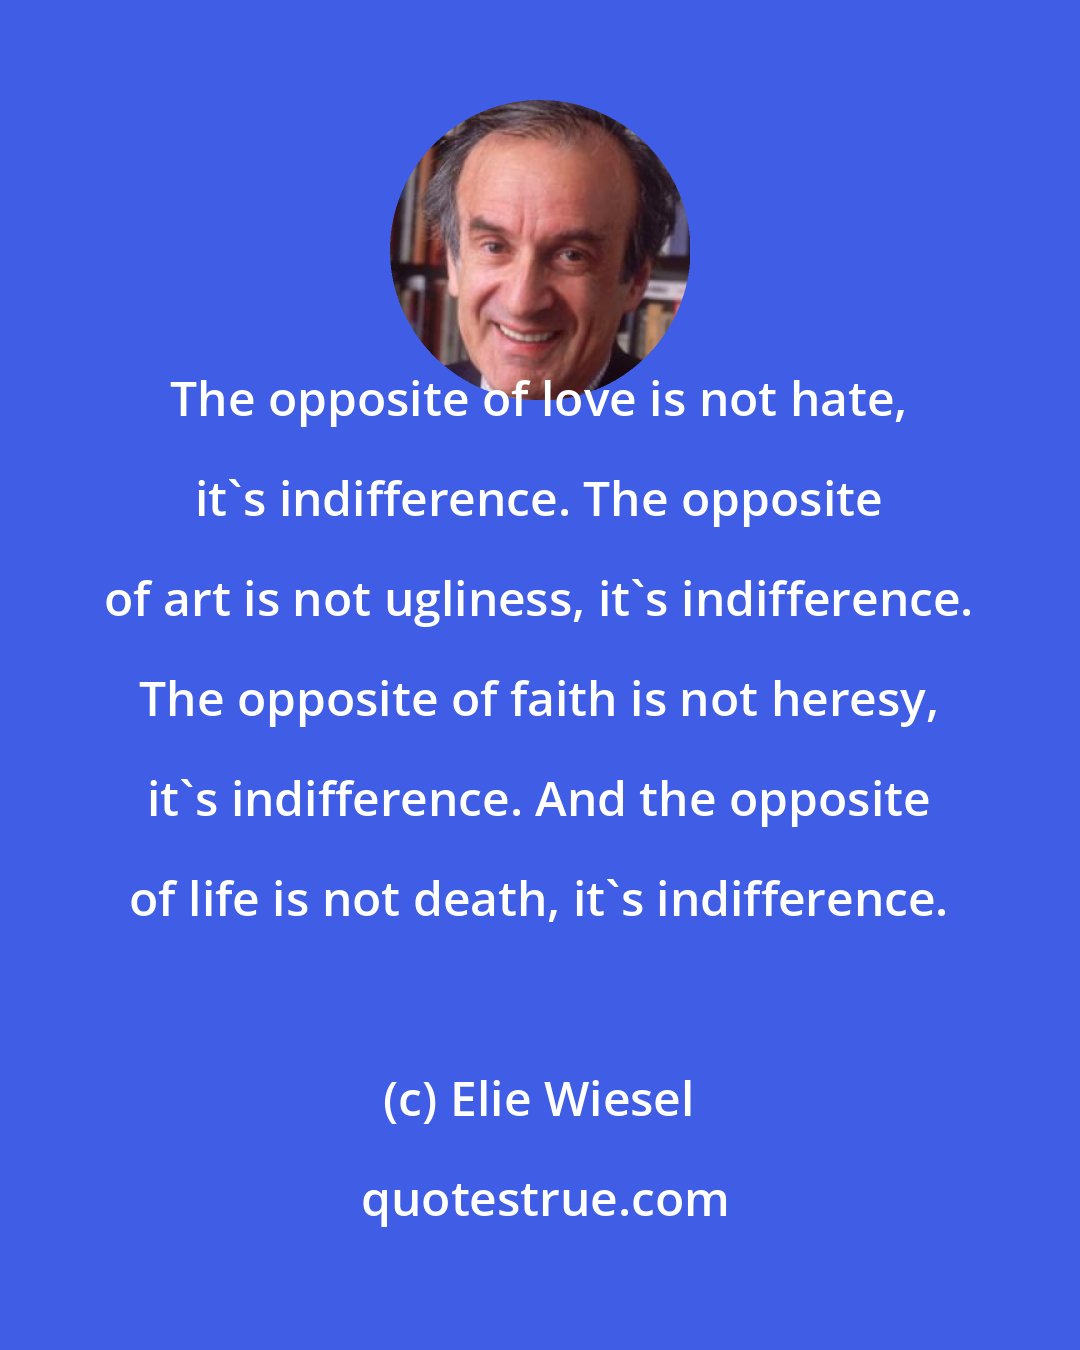 Elie Wiesel: The opposite of love is not hate, it's indifference. The opposite of art is not ugliness, it's indifference. The opposite of faith is not heresy, it's indifference. And the opposite of life is not death, it's indifference.